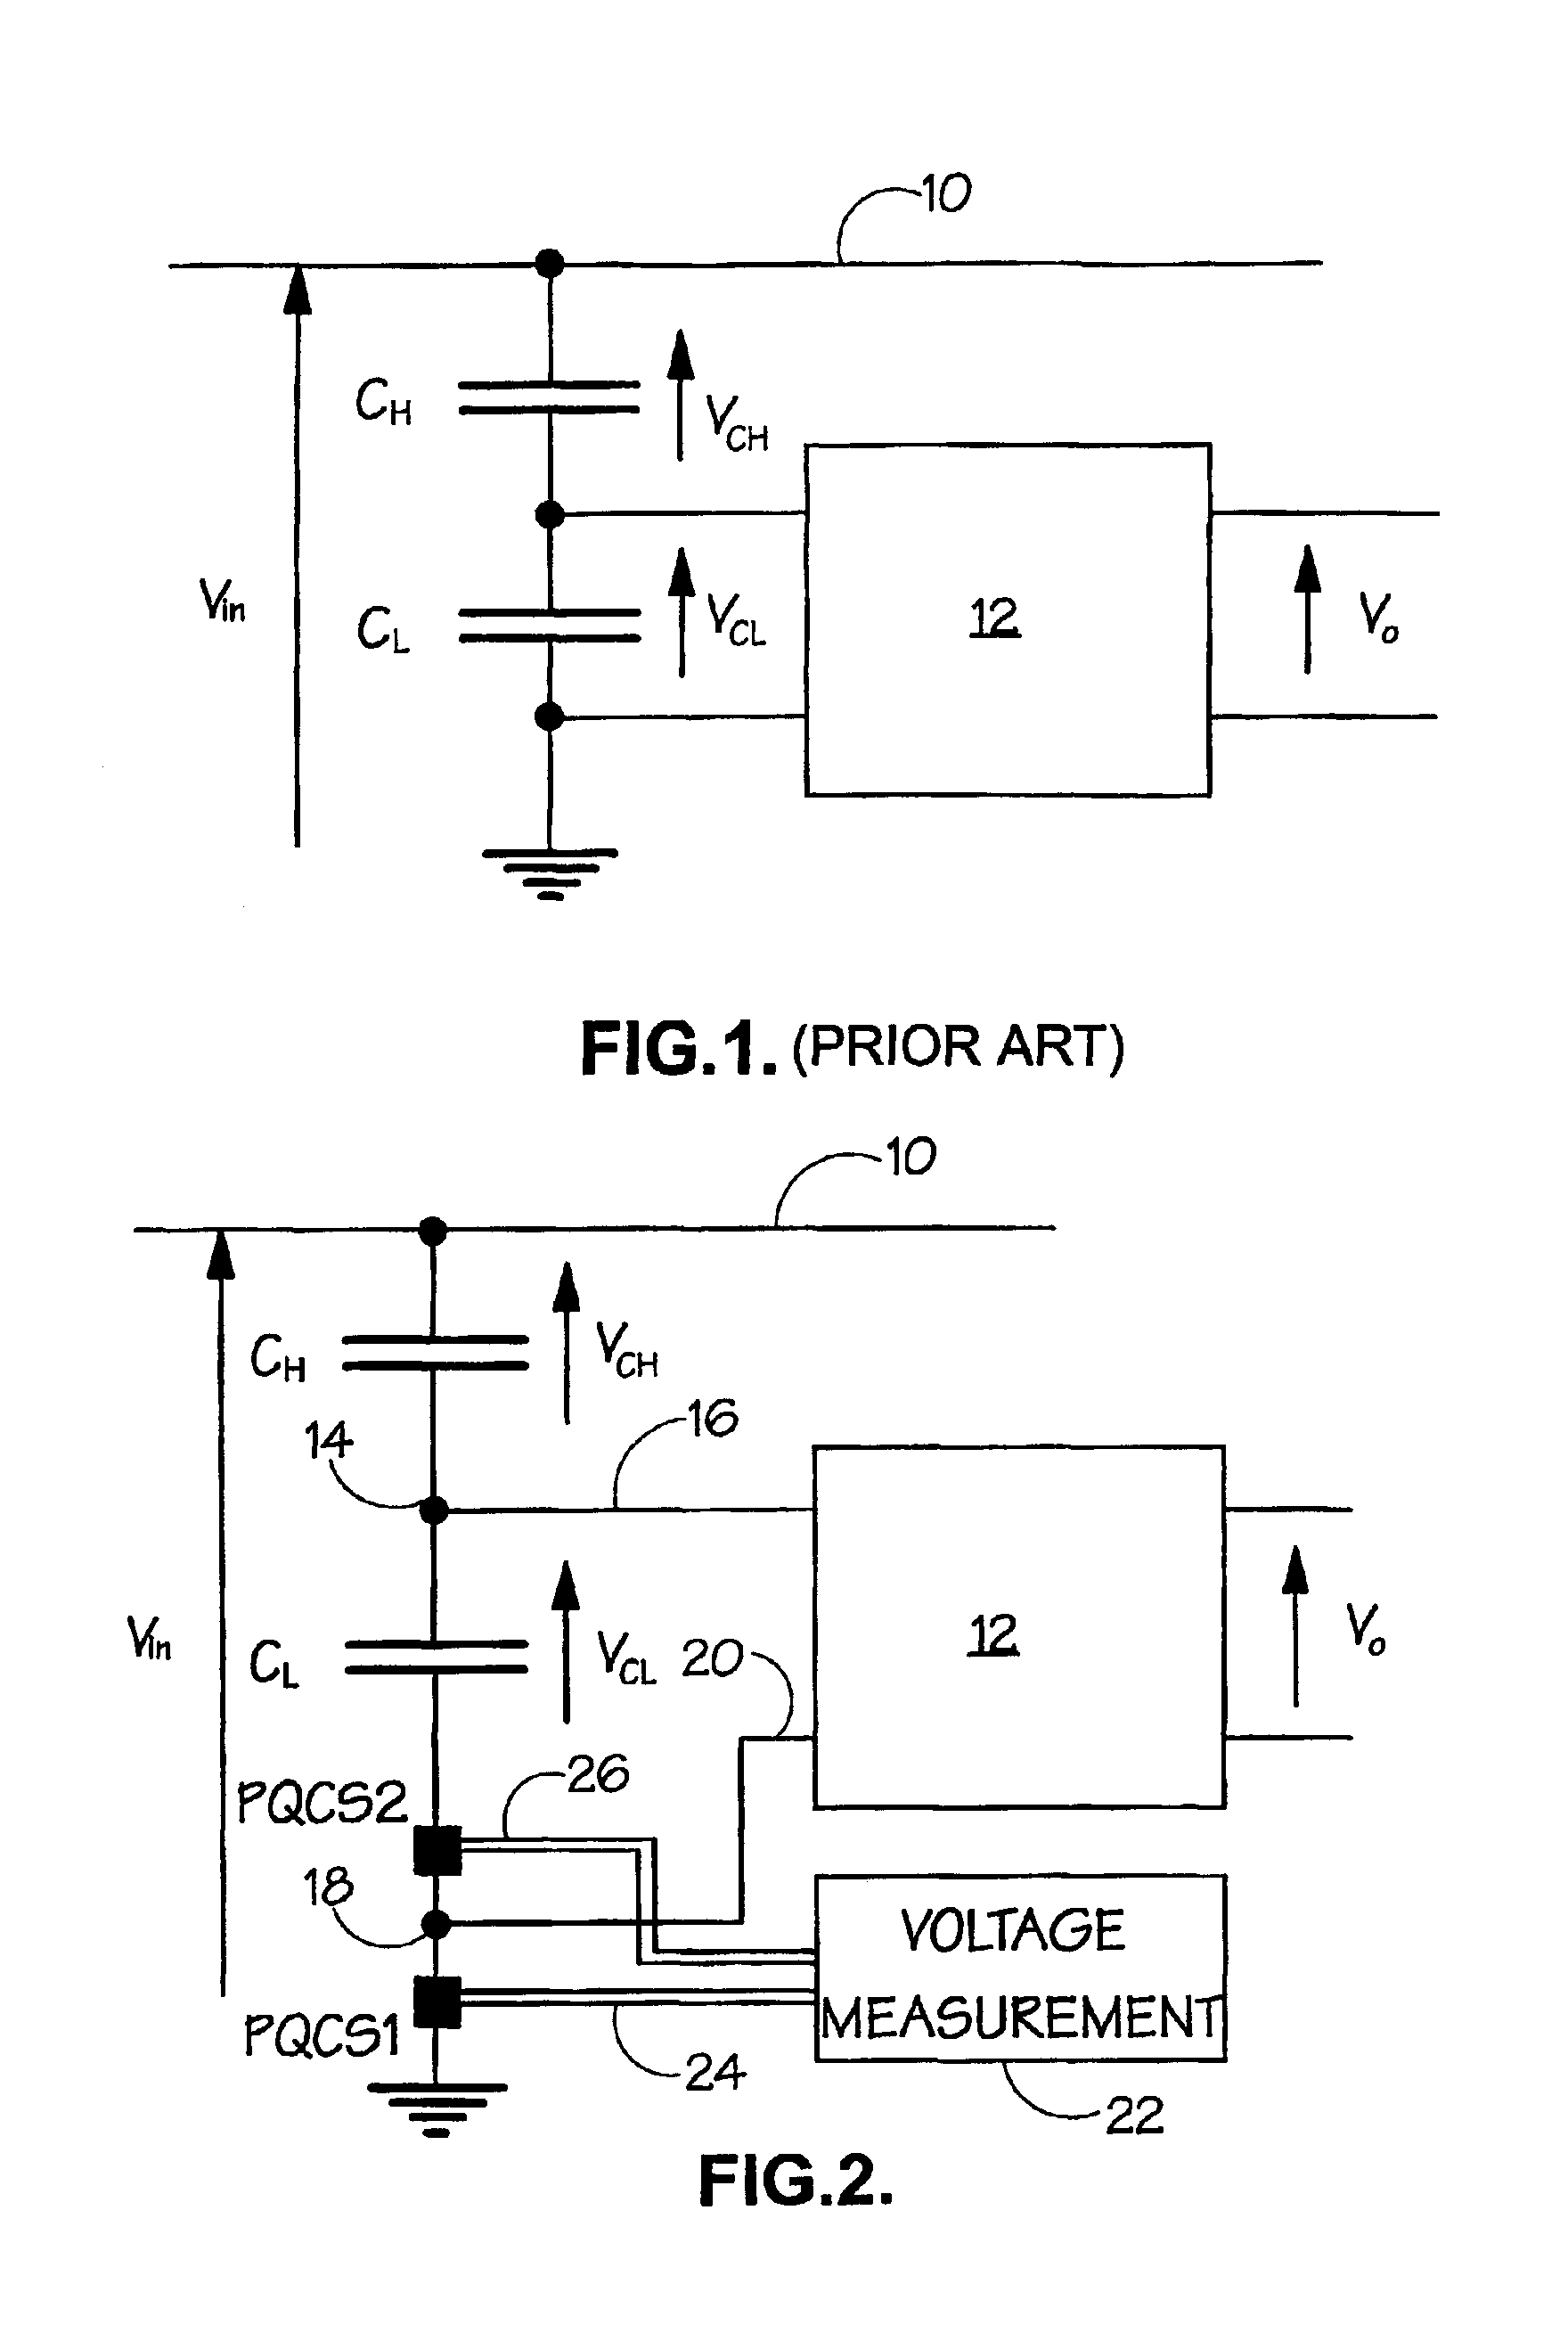 Capacitor coupled voltage transformer and its input voltage parameter determination